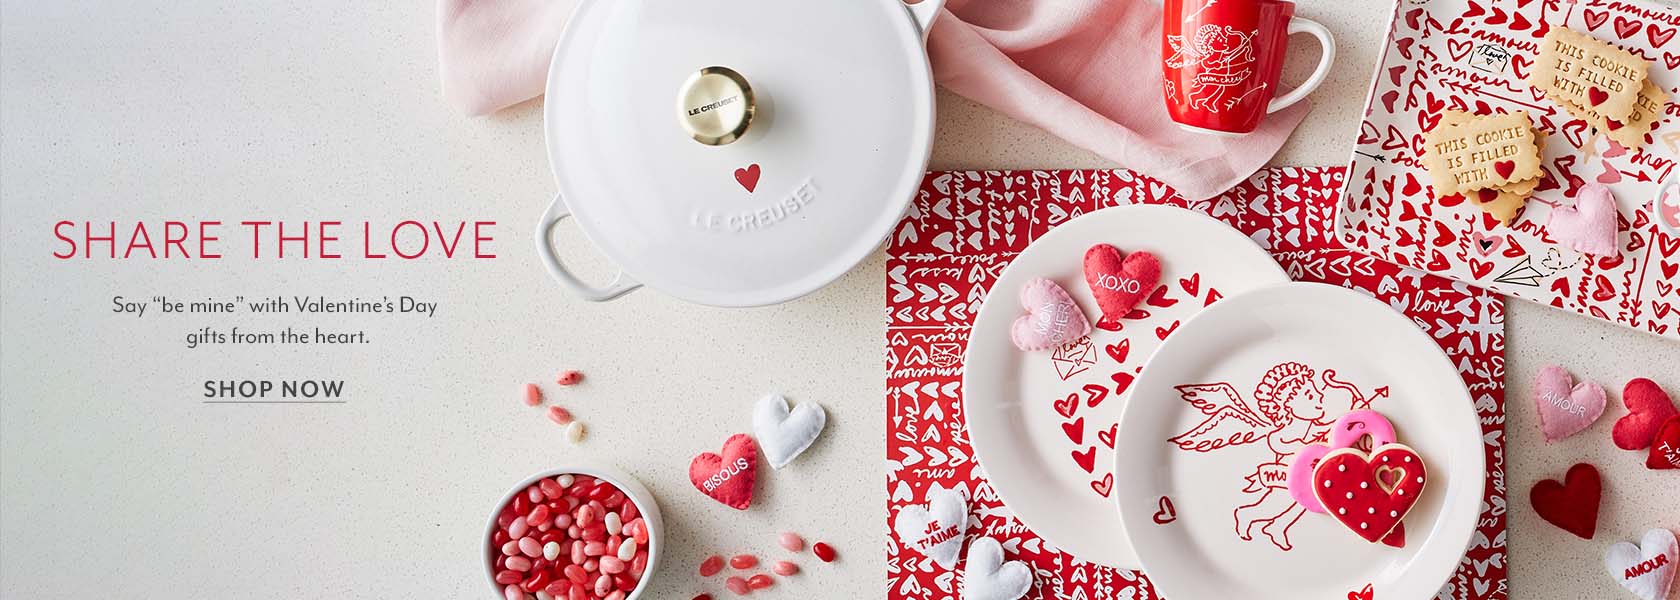 Share the love. Say Be Mine with Valentine's Day gifts from the Heart. Shop Now. White Le Creuset with red heart on lid.